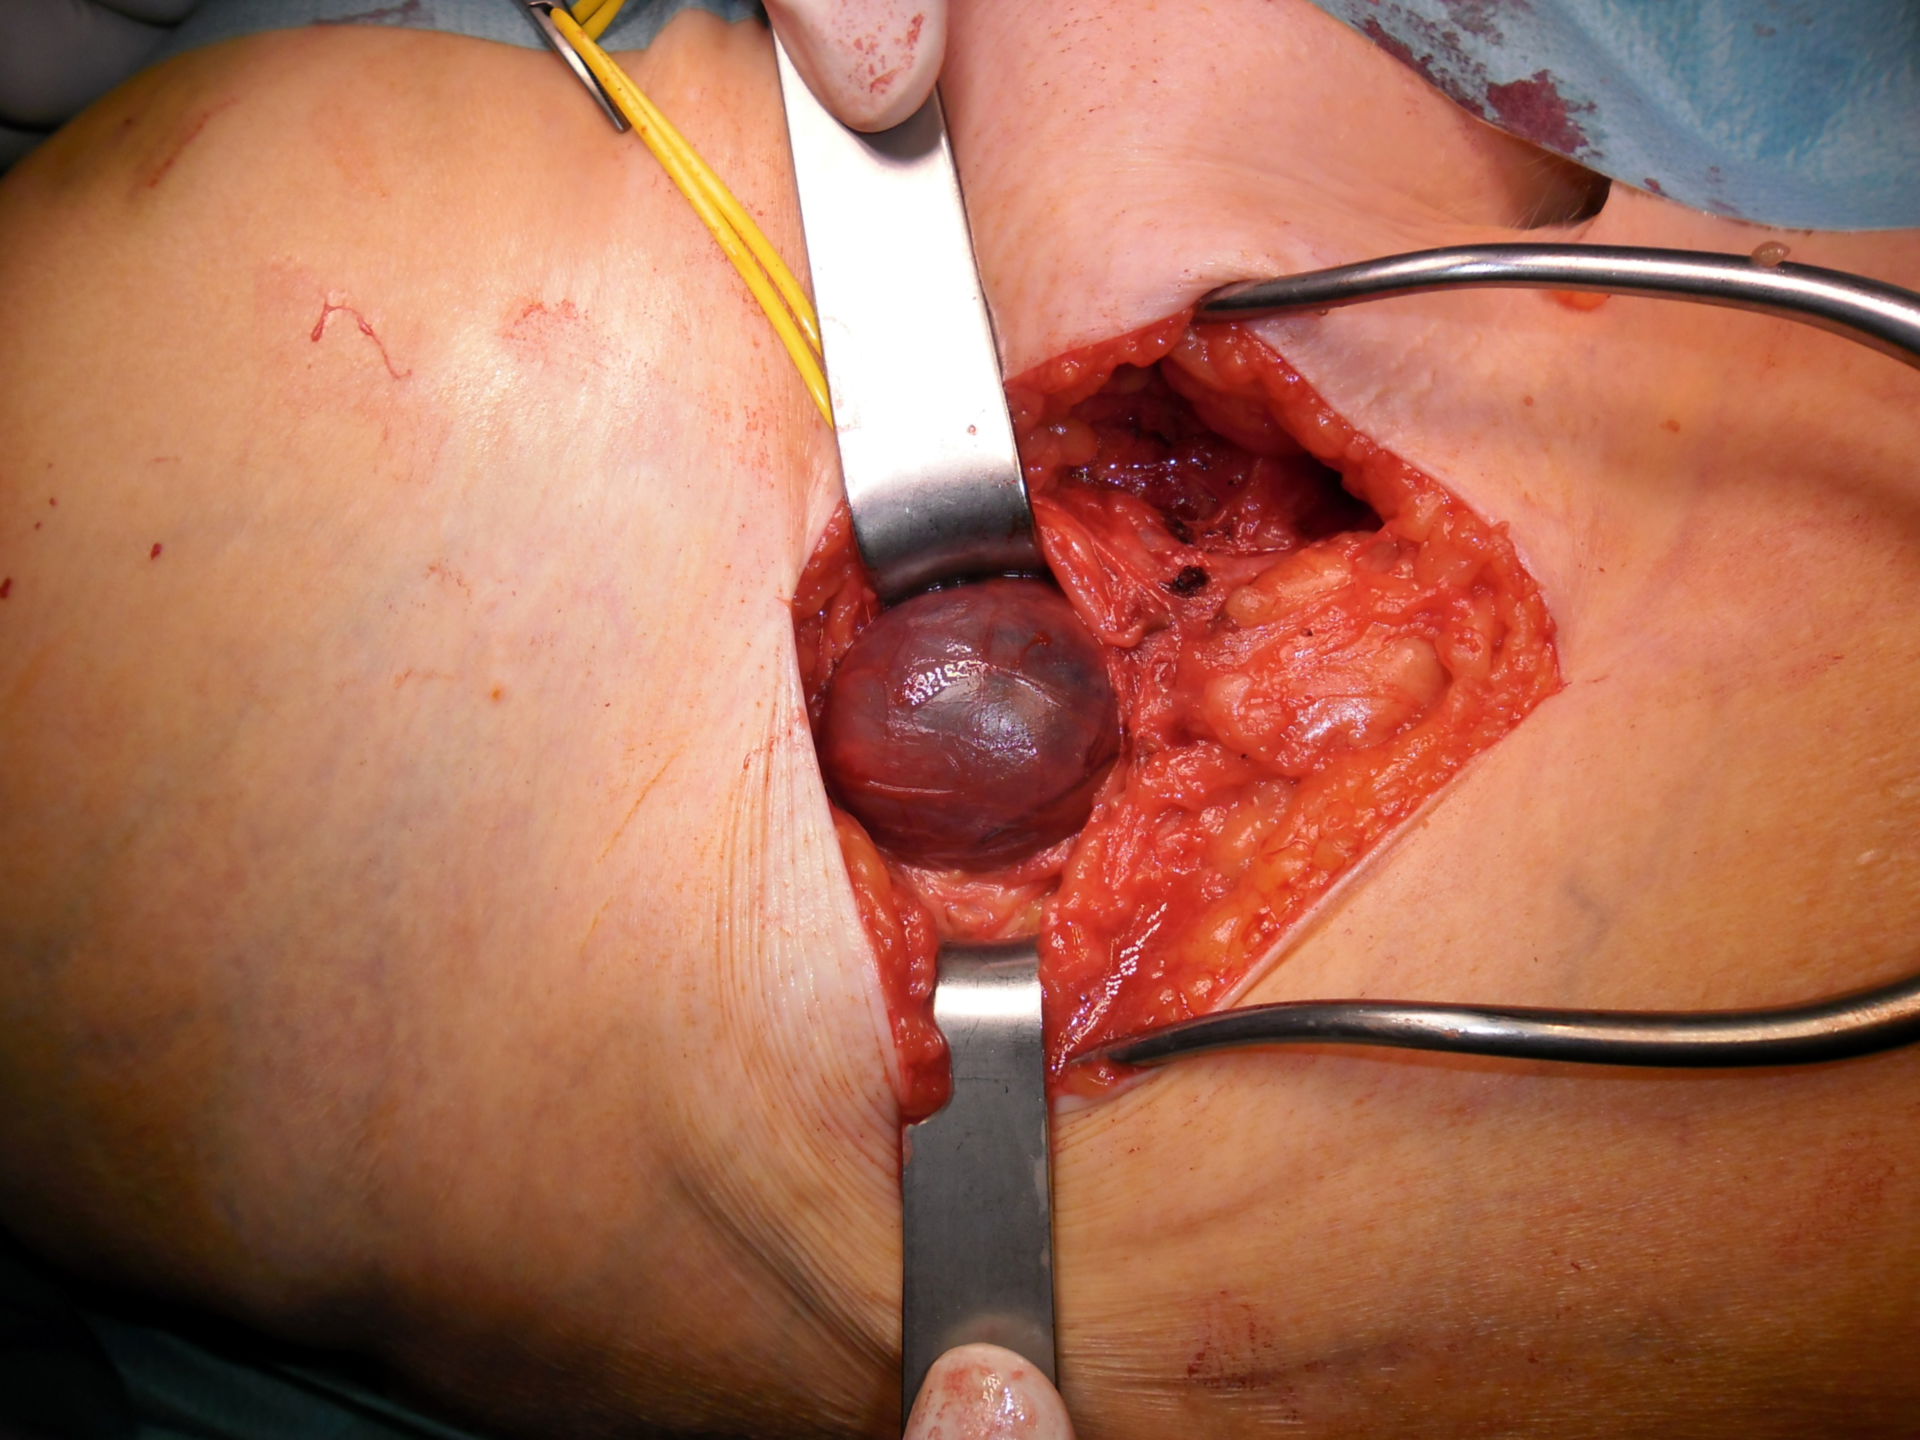 Synovialitis due to titanium abrasions of the acetabulum after TEP of the right hip